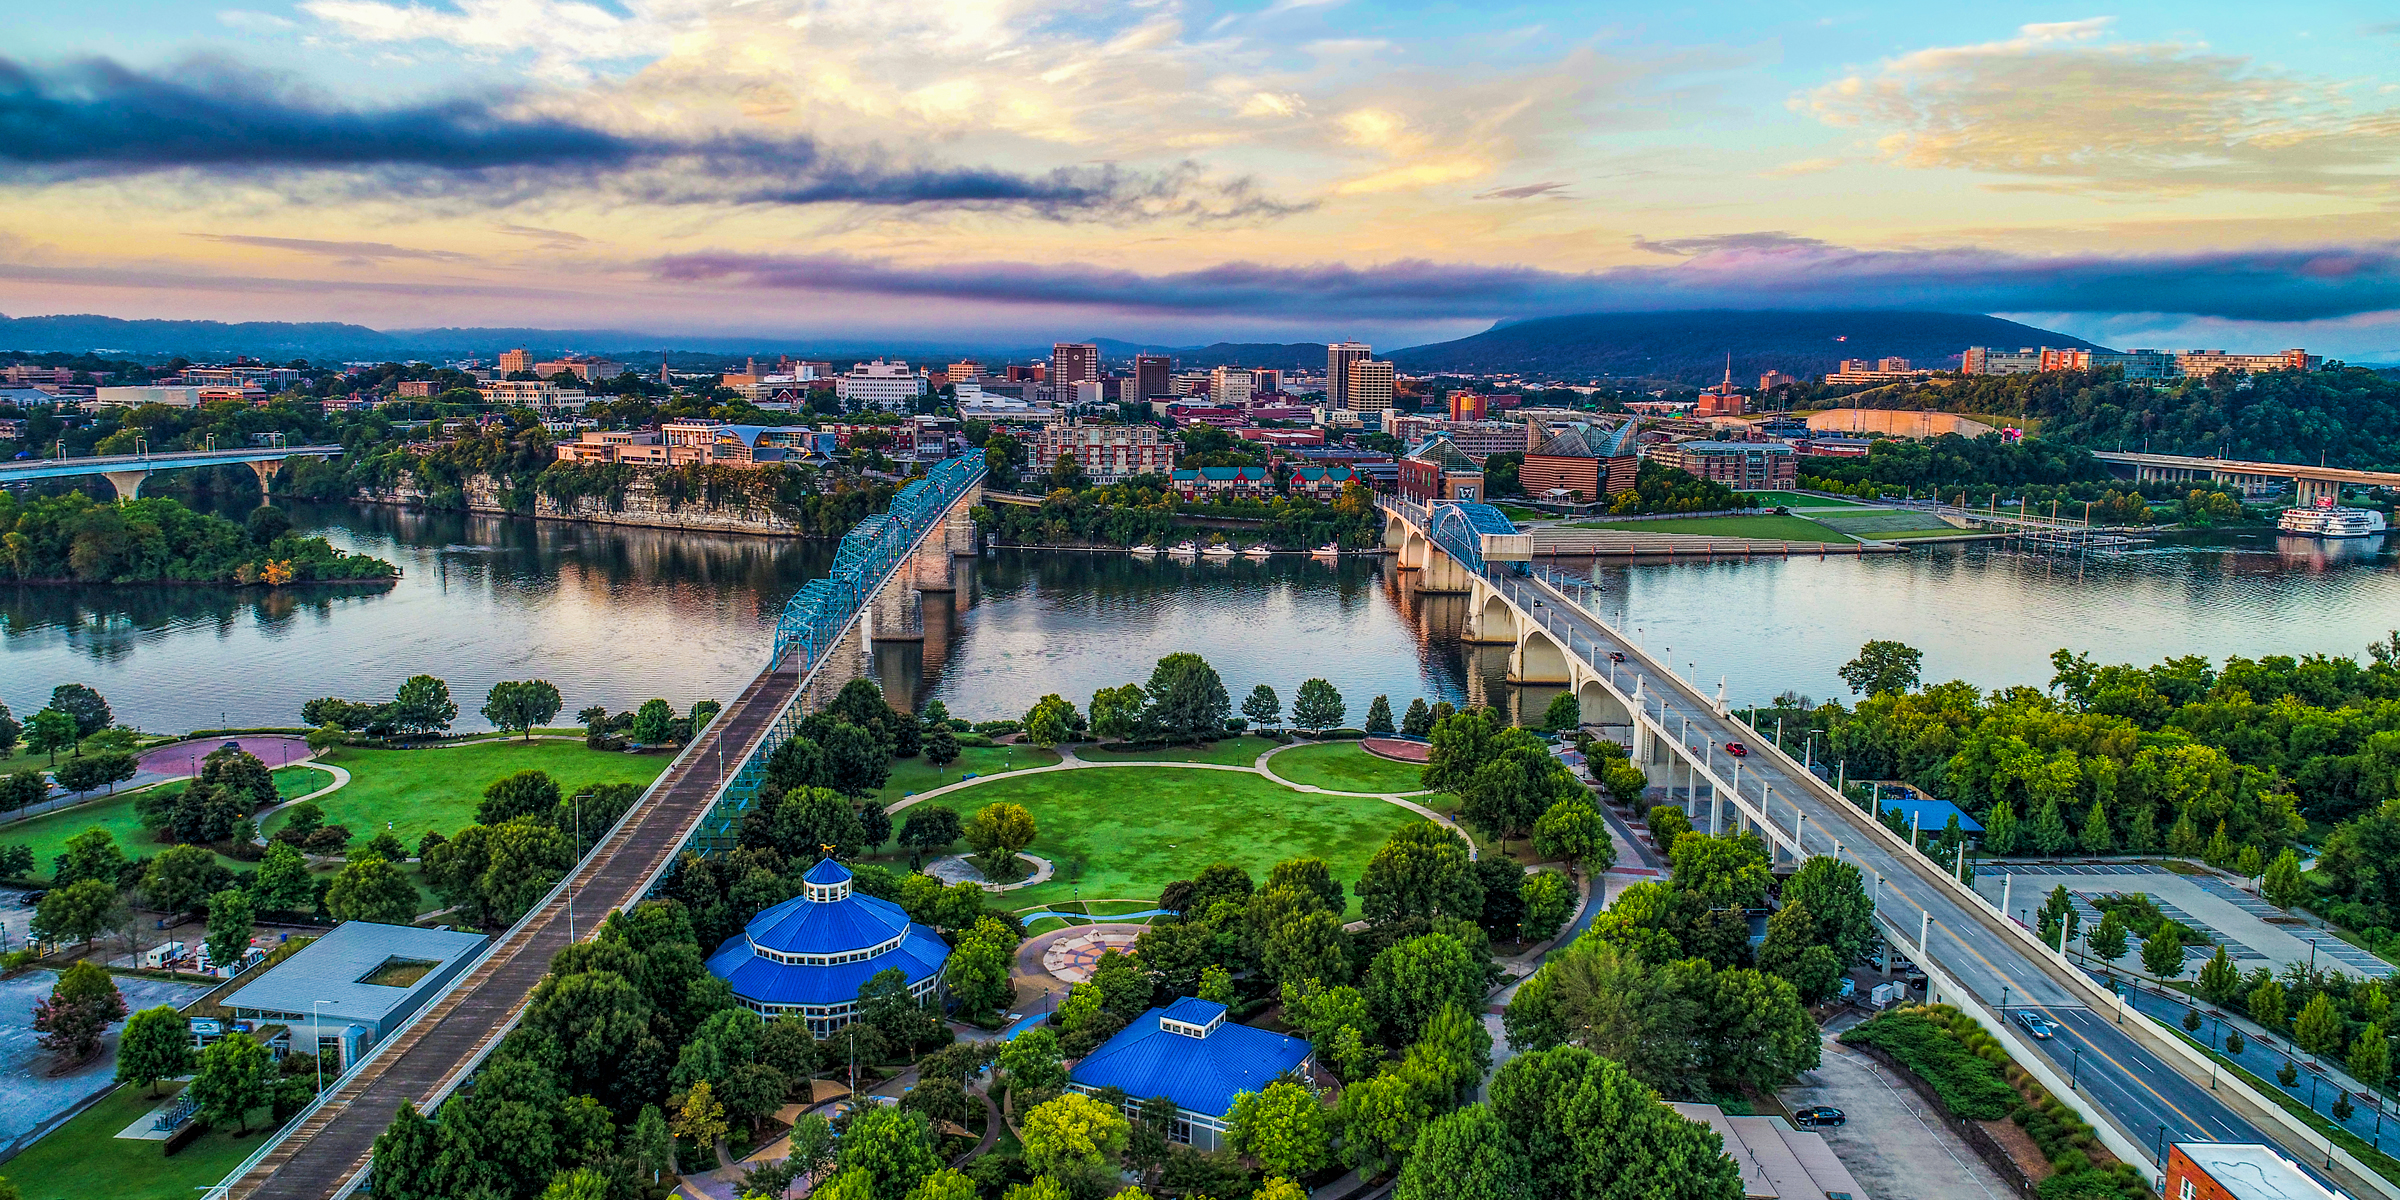 Aerial view of Chattanooga | Source: Shutterstock